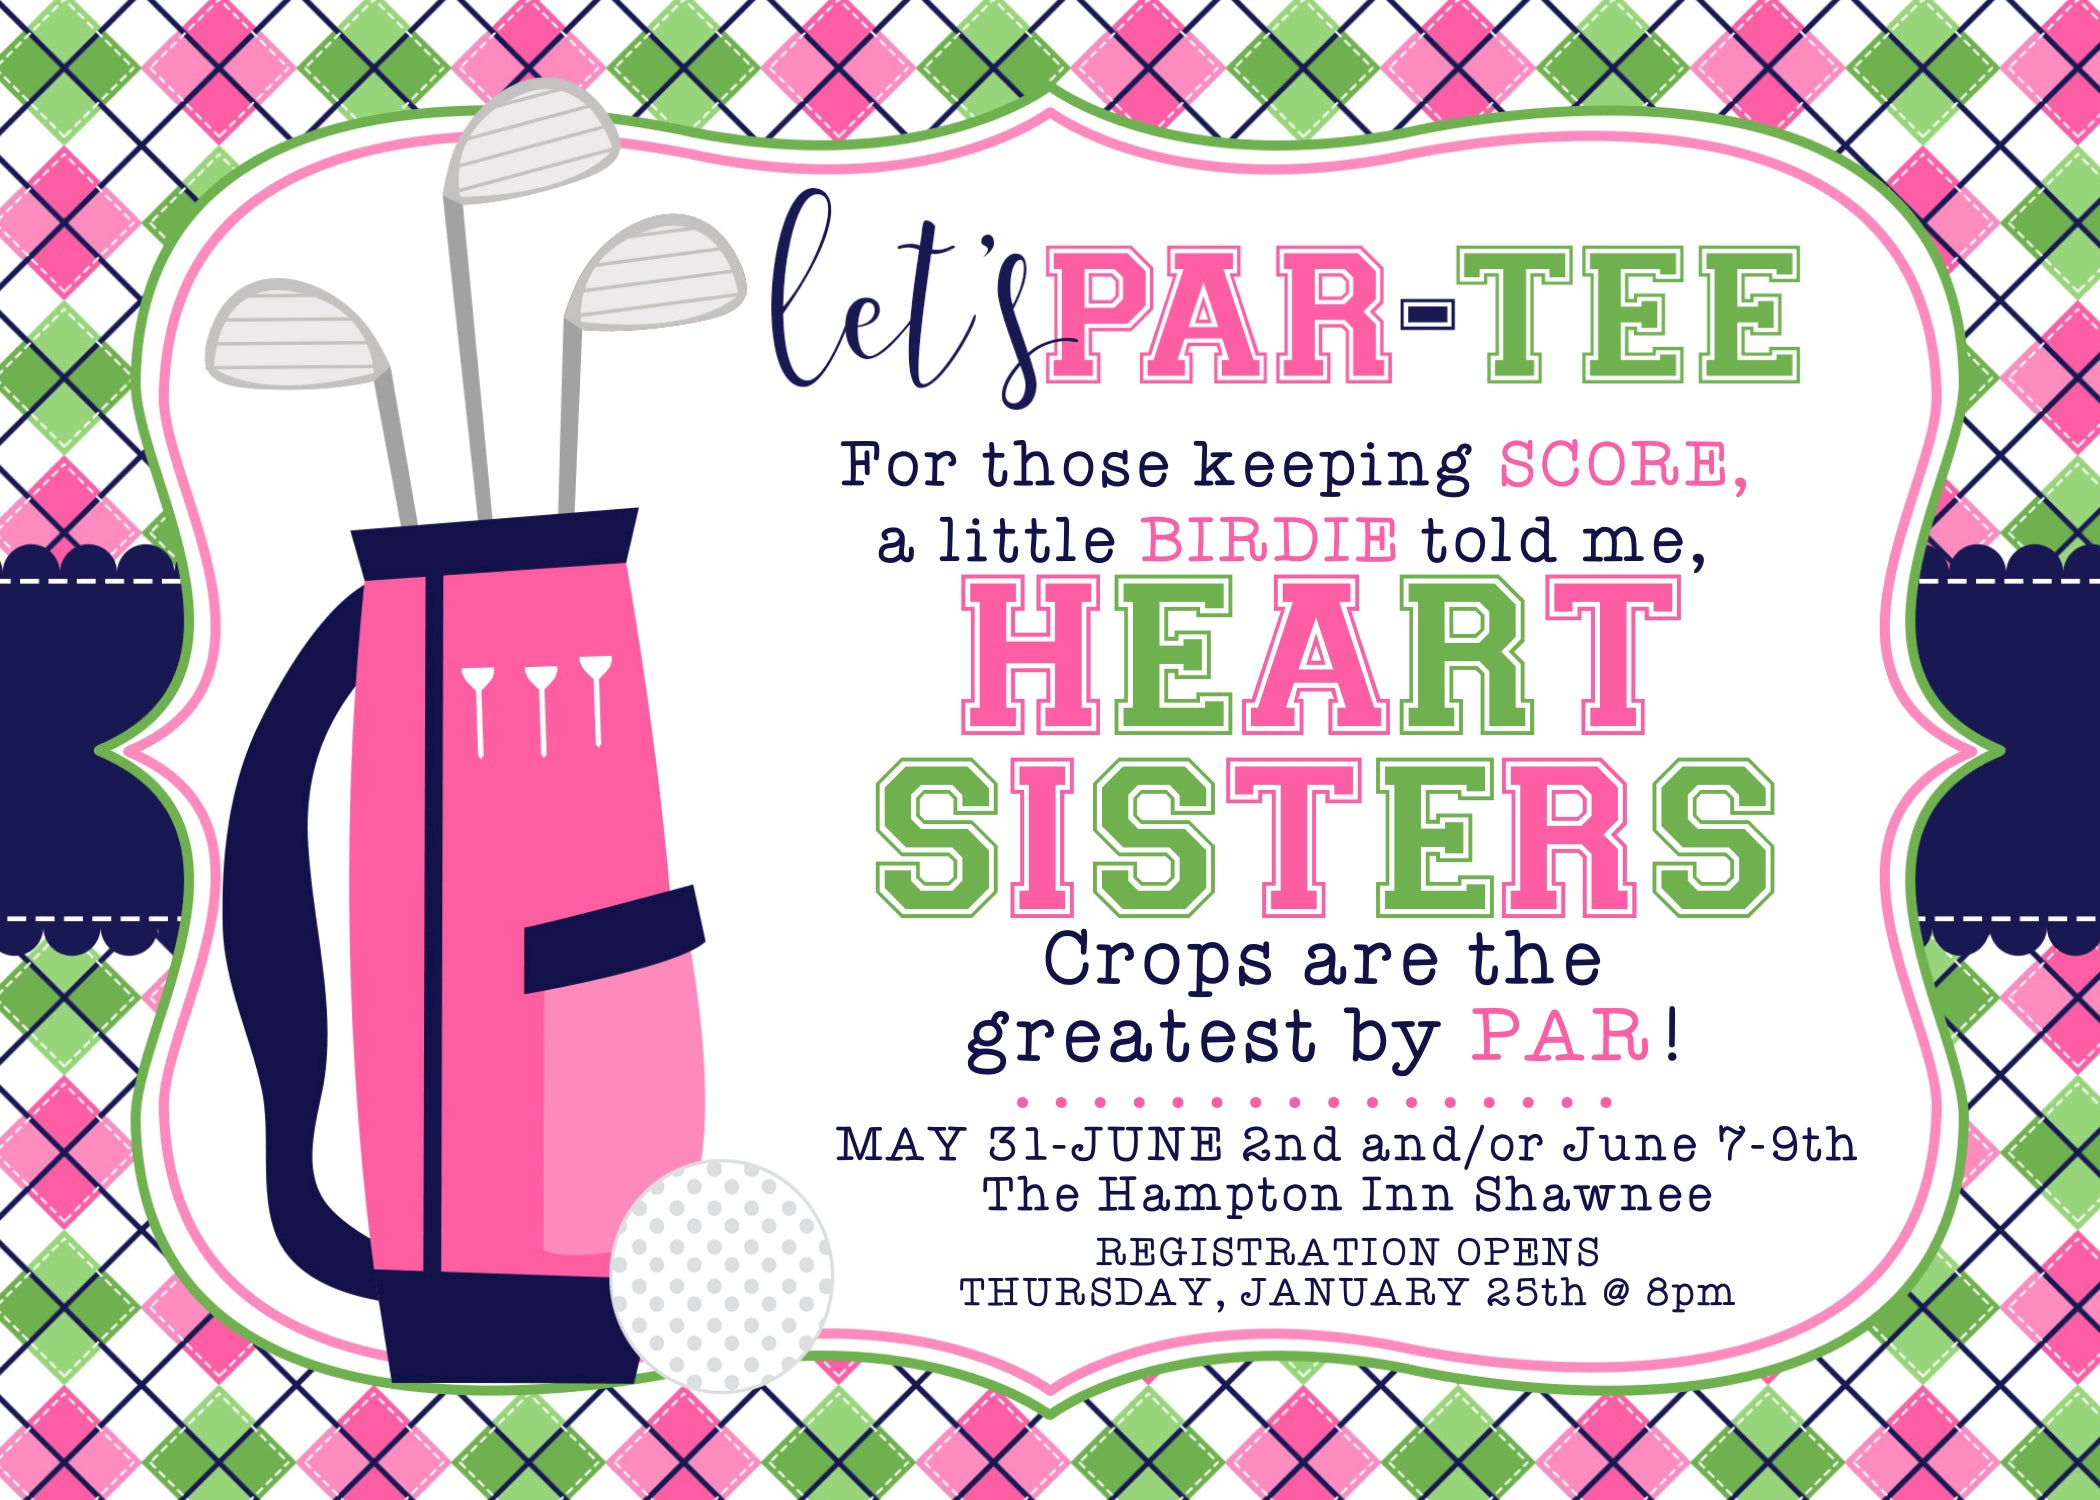 LET'S PAR-TEE! / MAY 31st-JUNE 2nd